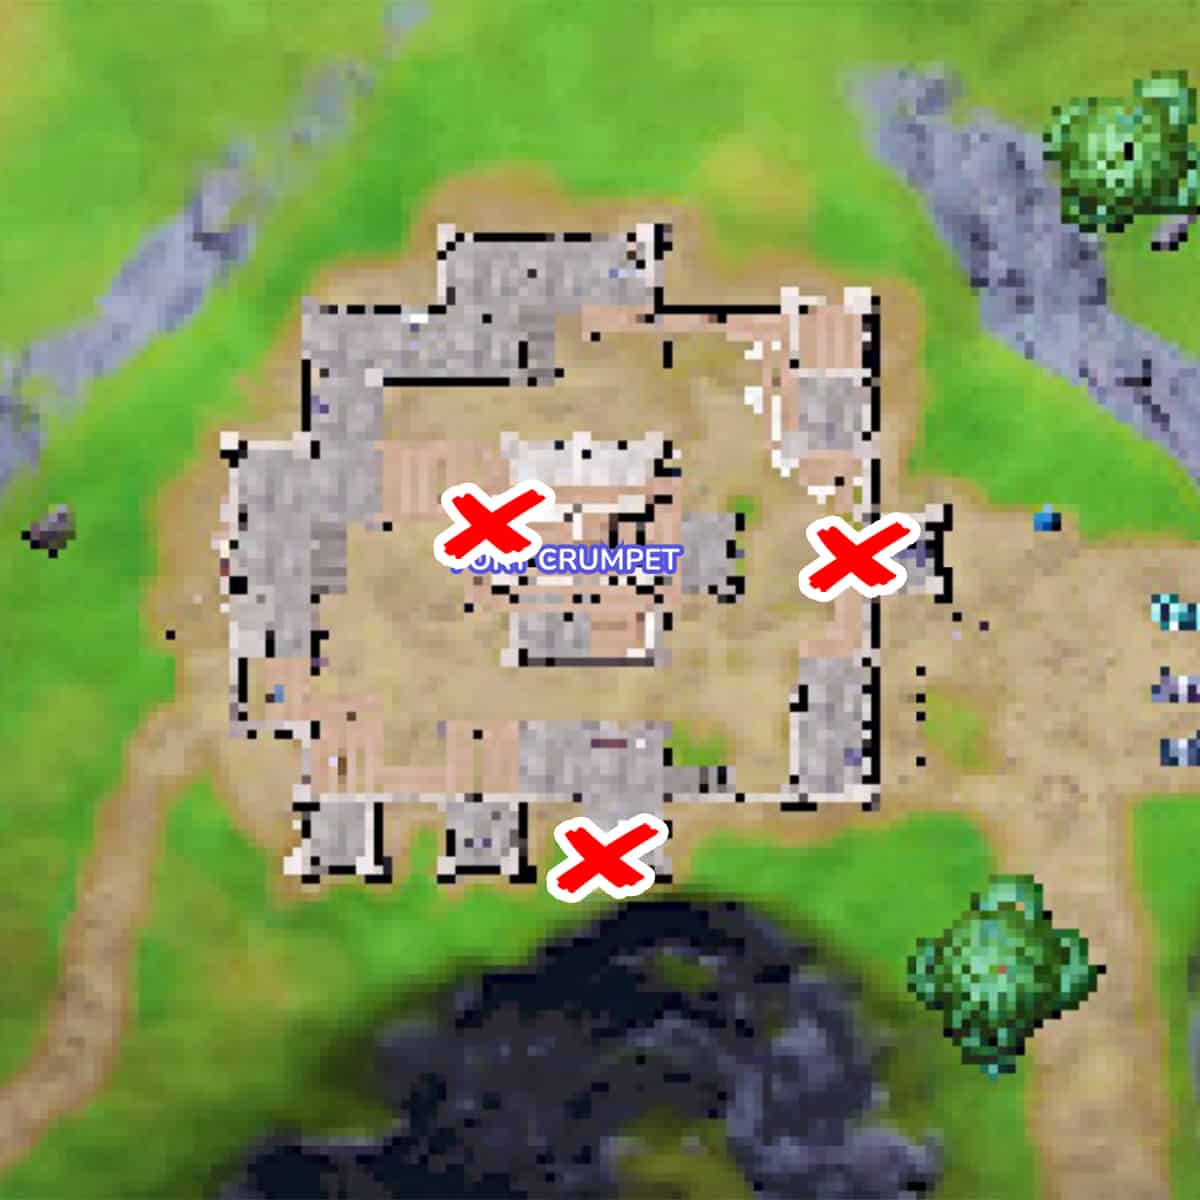 Knightly Crimson color bottles marked on the Fort Crumpet map in Fortnite